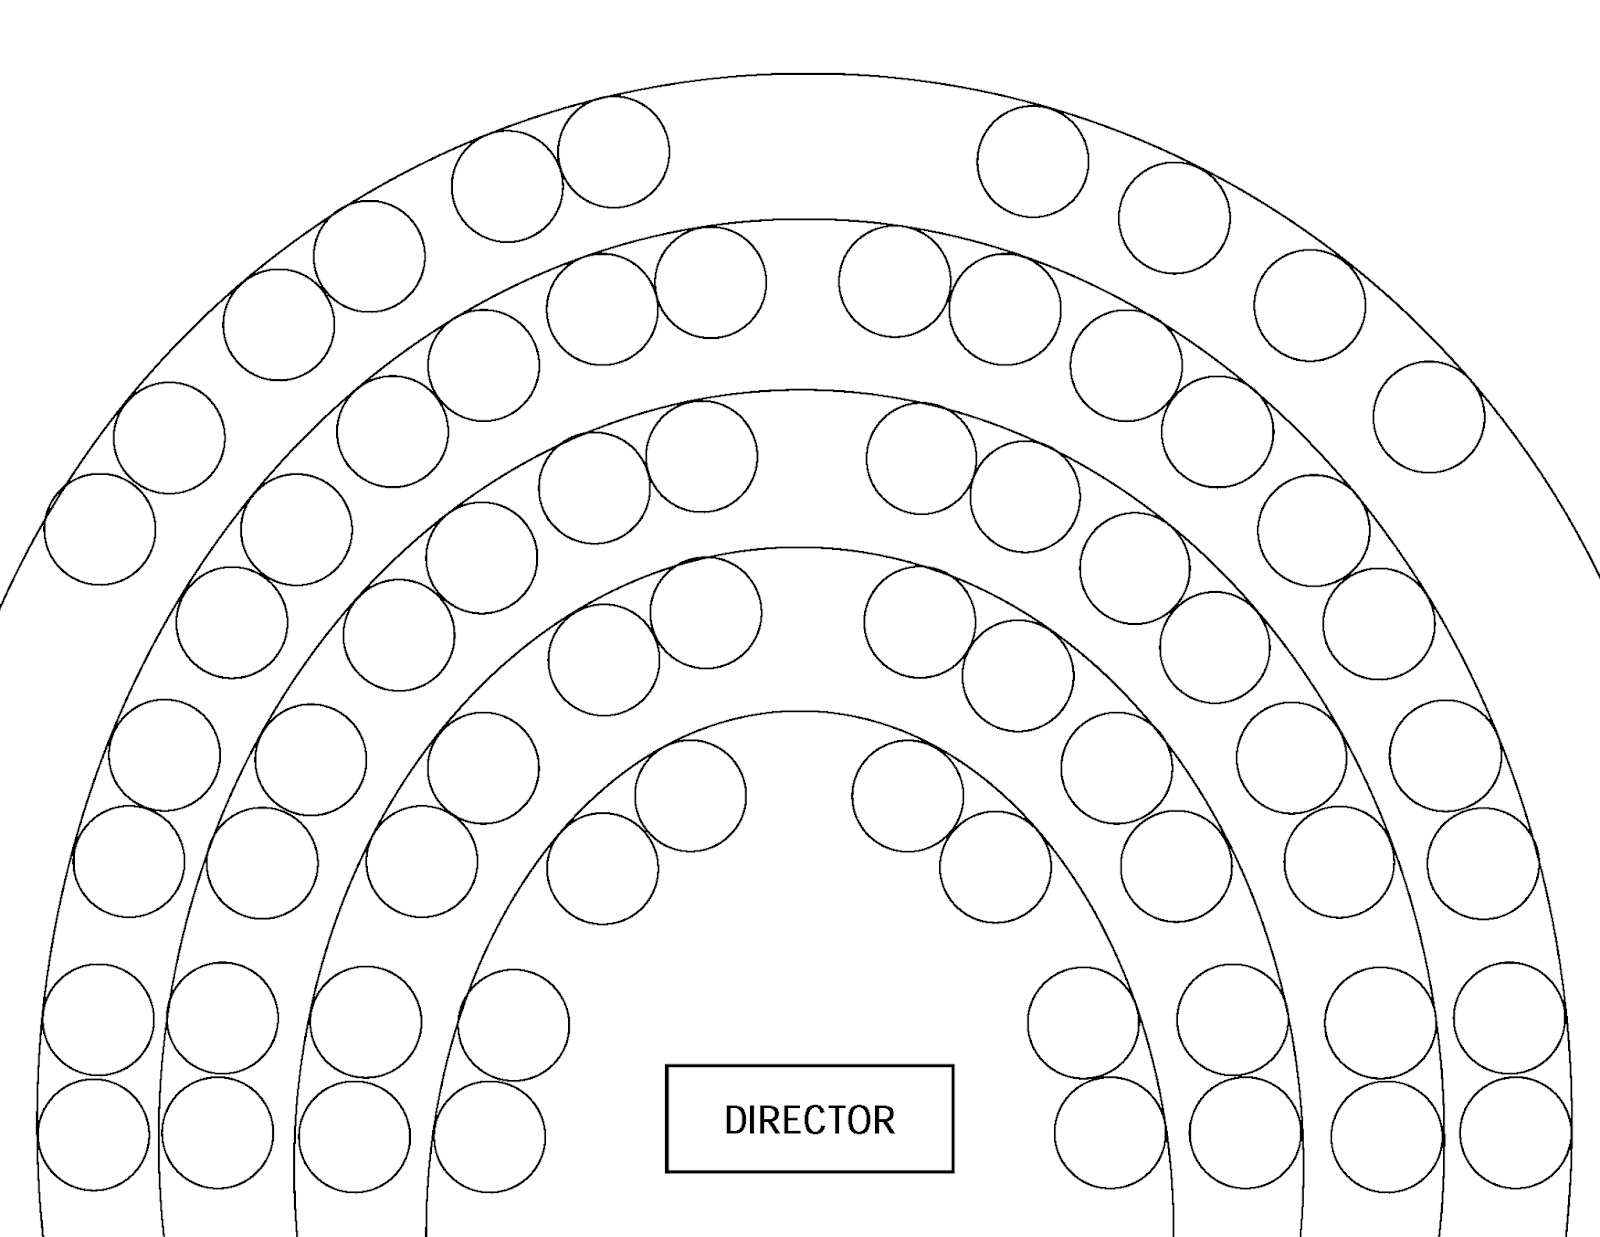 Fun plan. Orchestra Seats. Orchestra Seating Chart. Classroom Seating Arrangement. Orchestra (Auditorium).